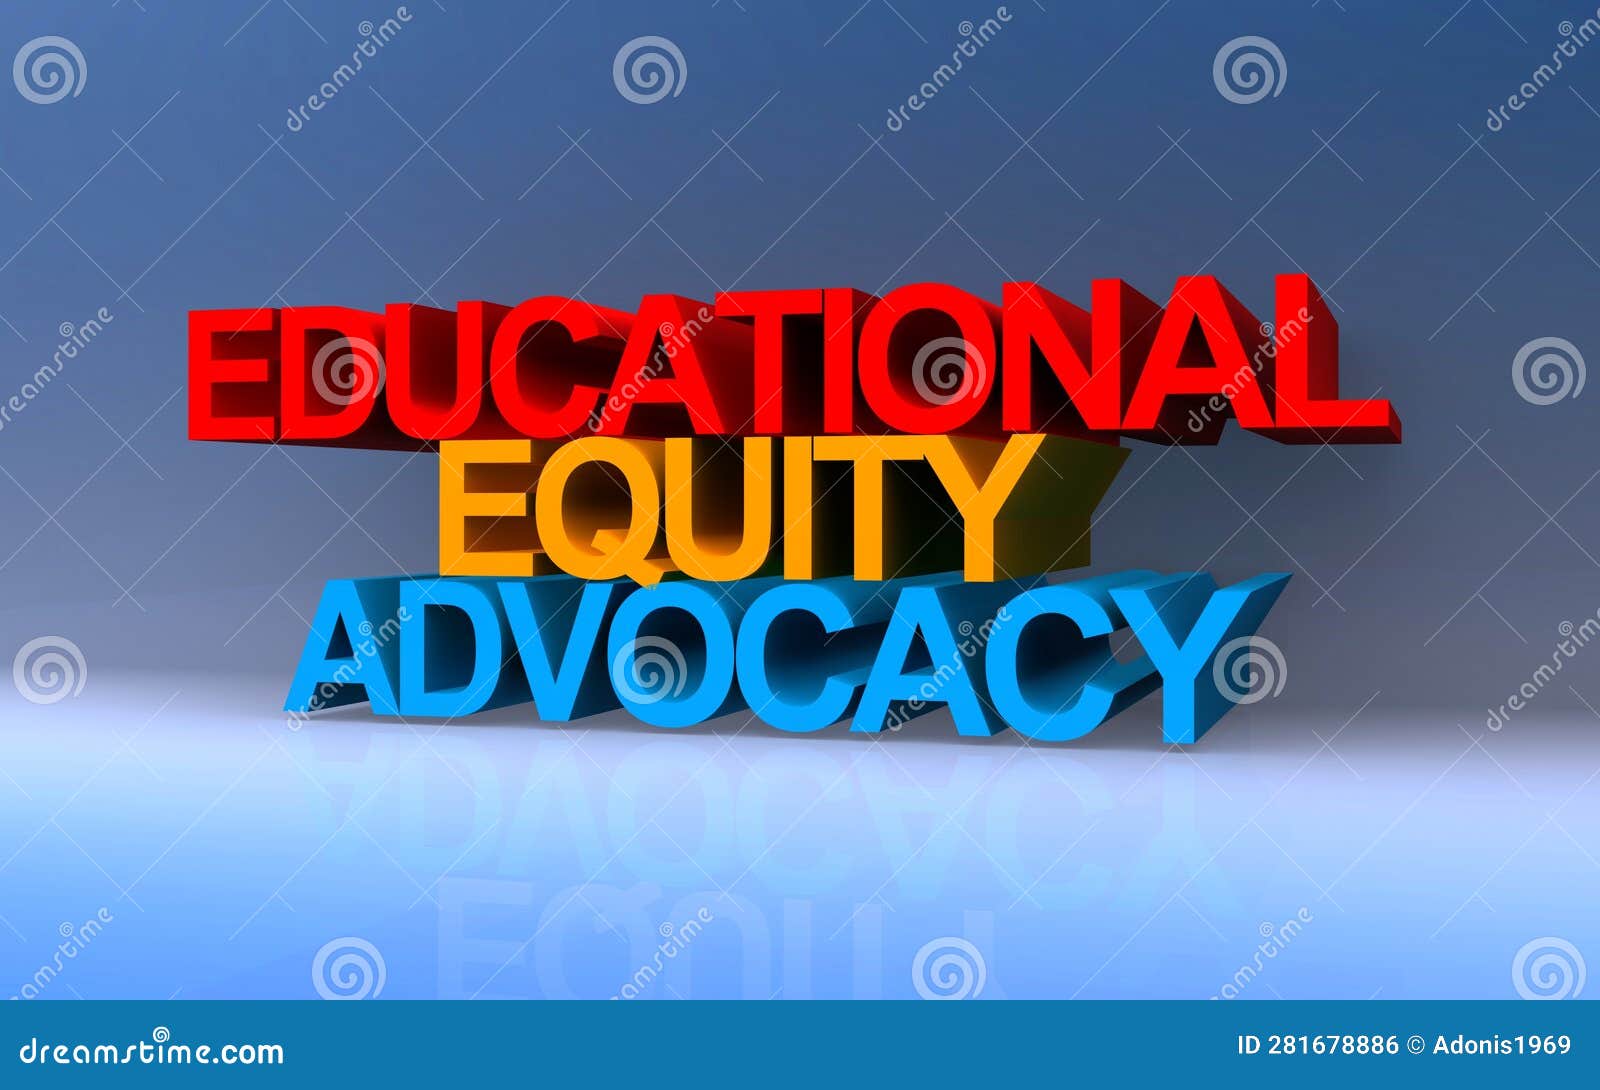 educational equity advocacy on blue